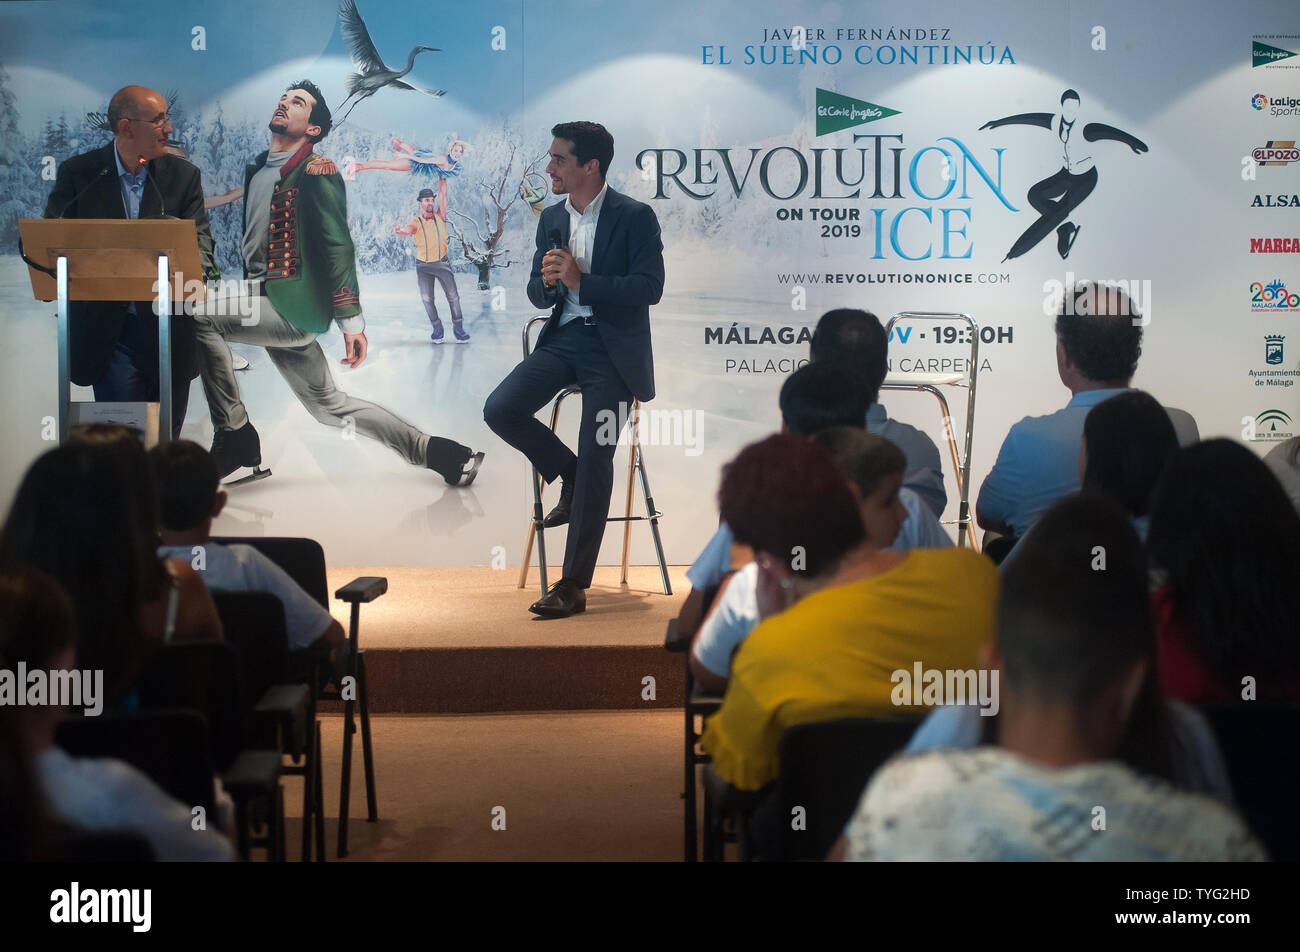 Spanish skater and world champion Javier Fernández speaks during a press conference about the presentation of the show.Revolution on Ice Tour 2019' show is a spectacle on ice with an international cast of world champion skaters, headed by the Spanish skater Javier Fernández. The show also features musical with the participation of Spanish singer and DJ Carlos Jean and acrobatics performances. Stock Photo